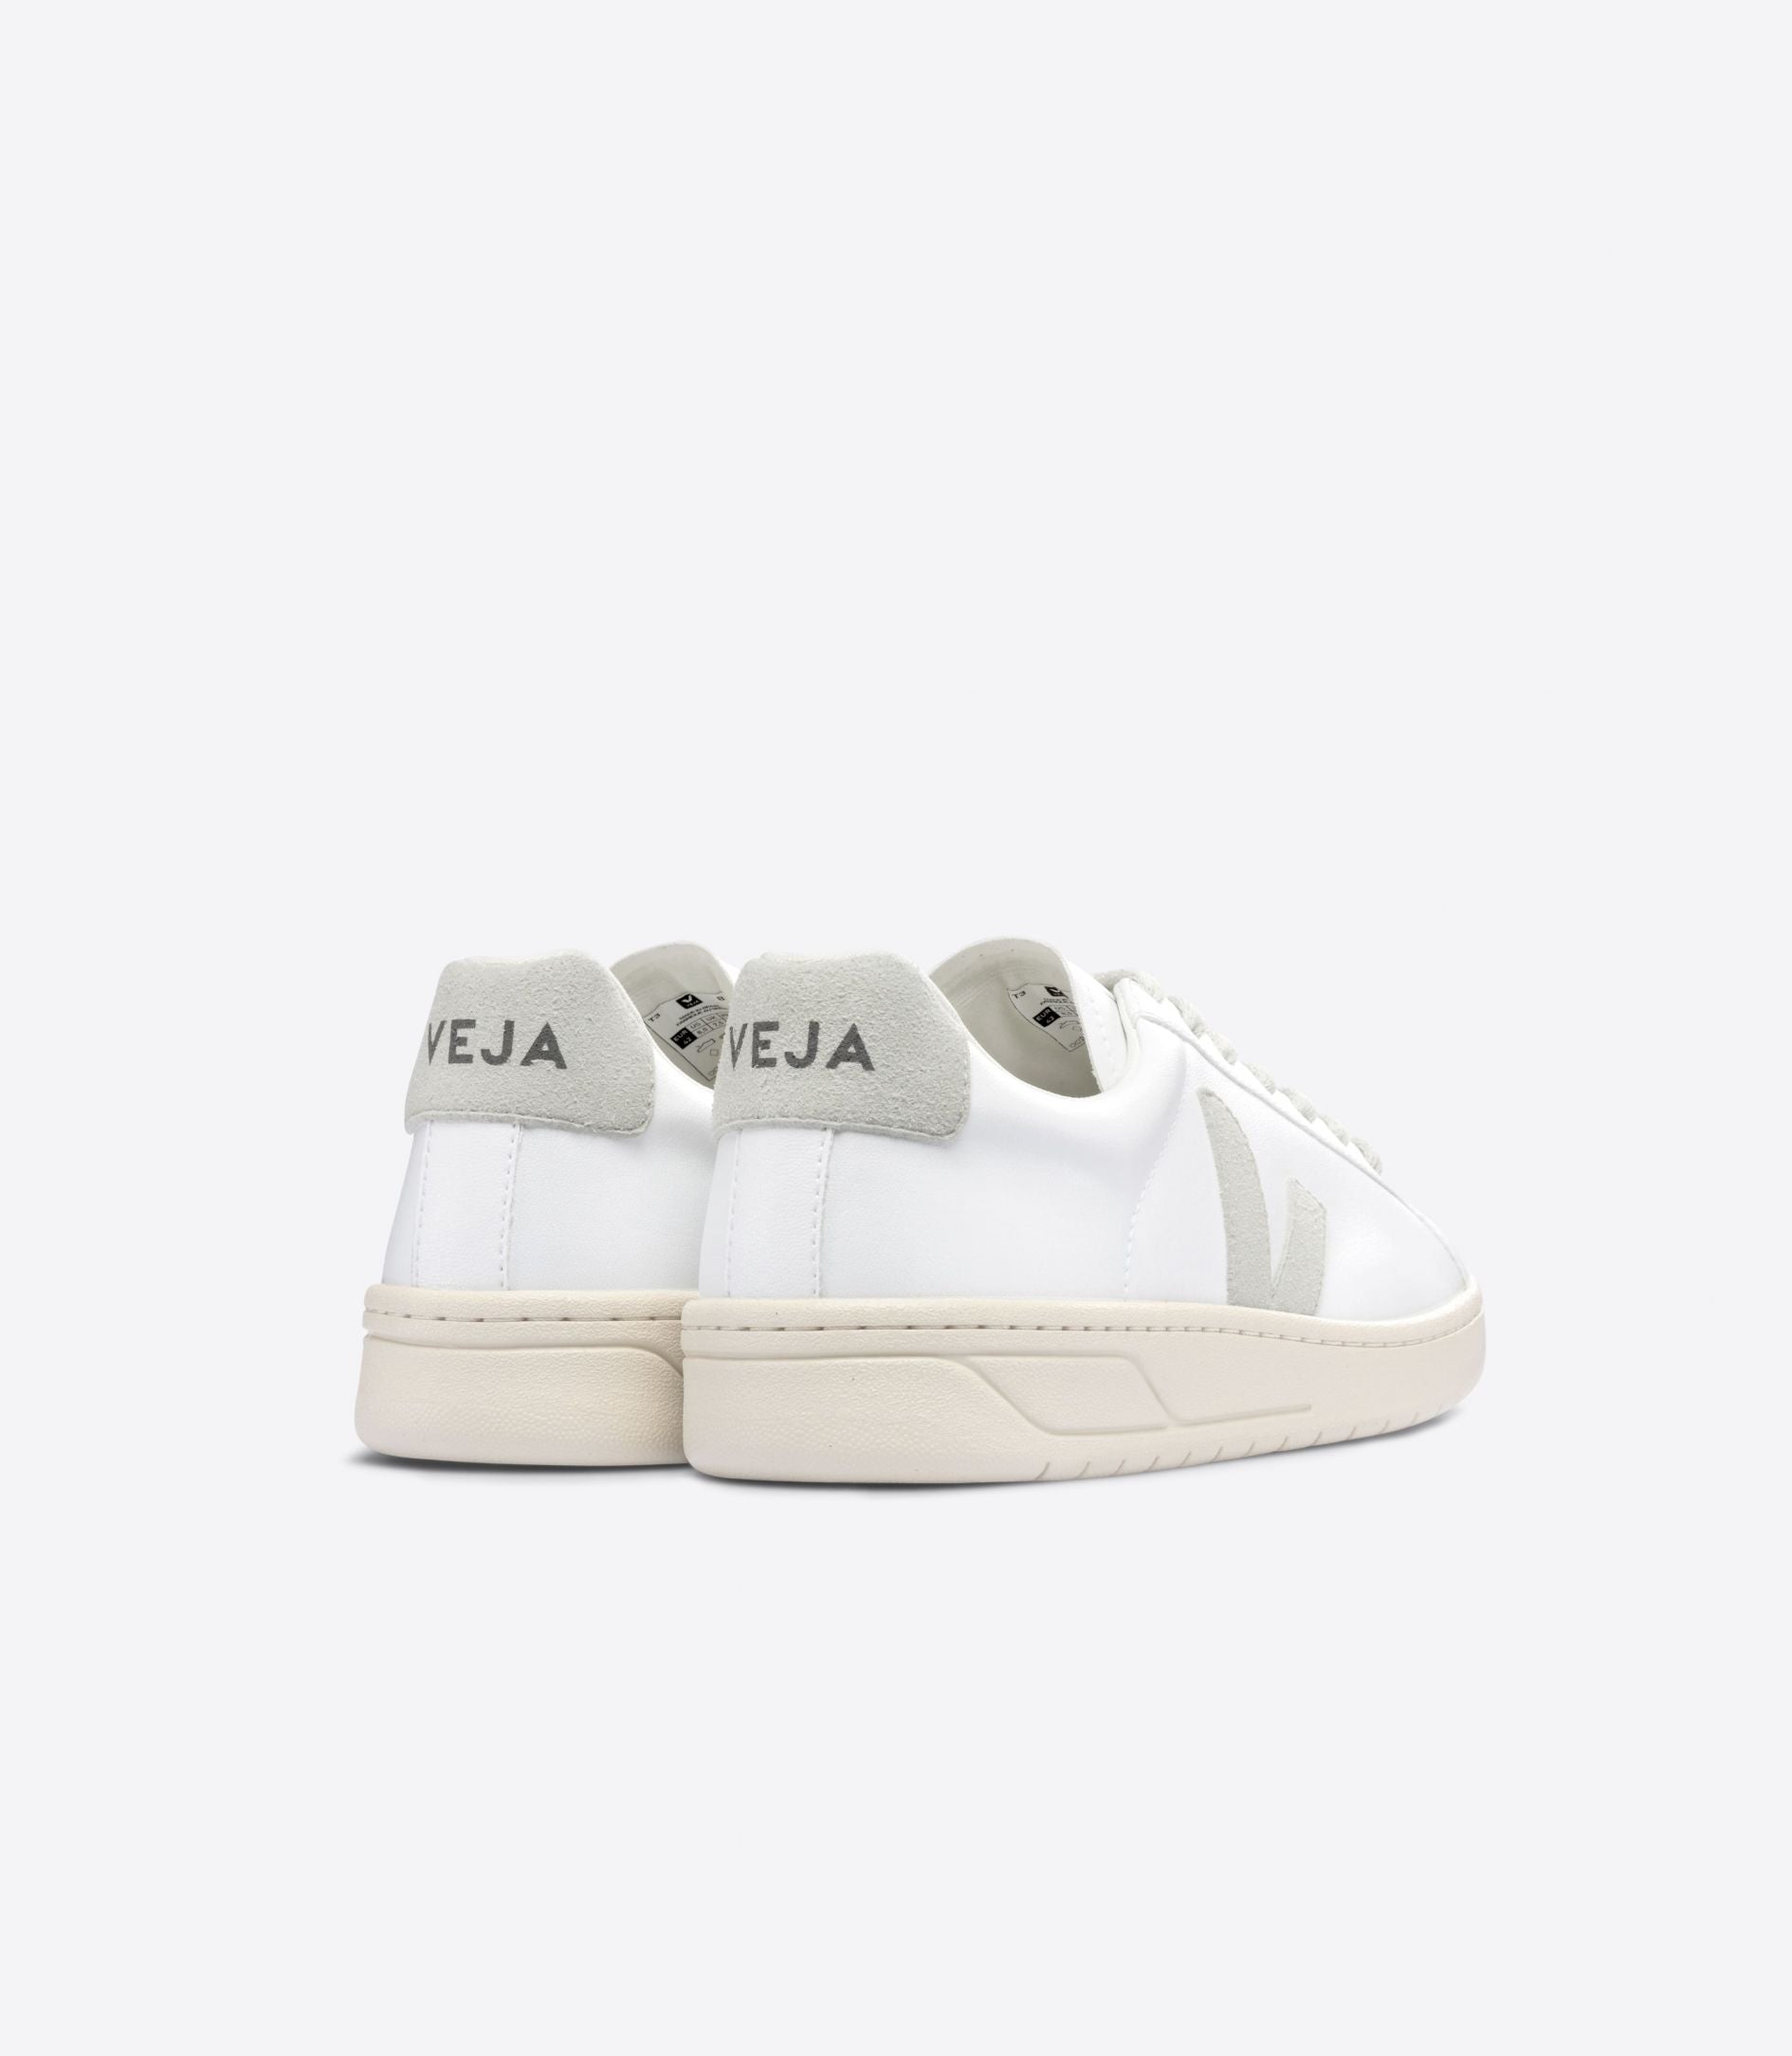 Back angle view of the Women's Urca by VEJA in the color White/Natural